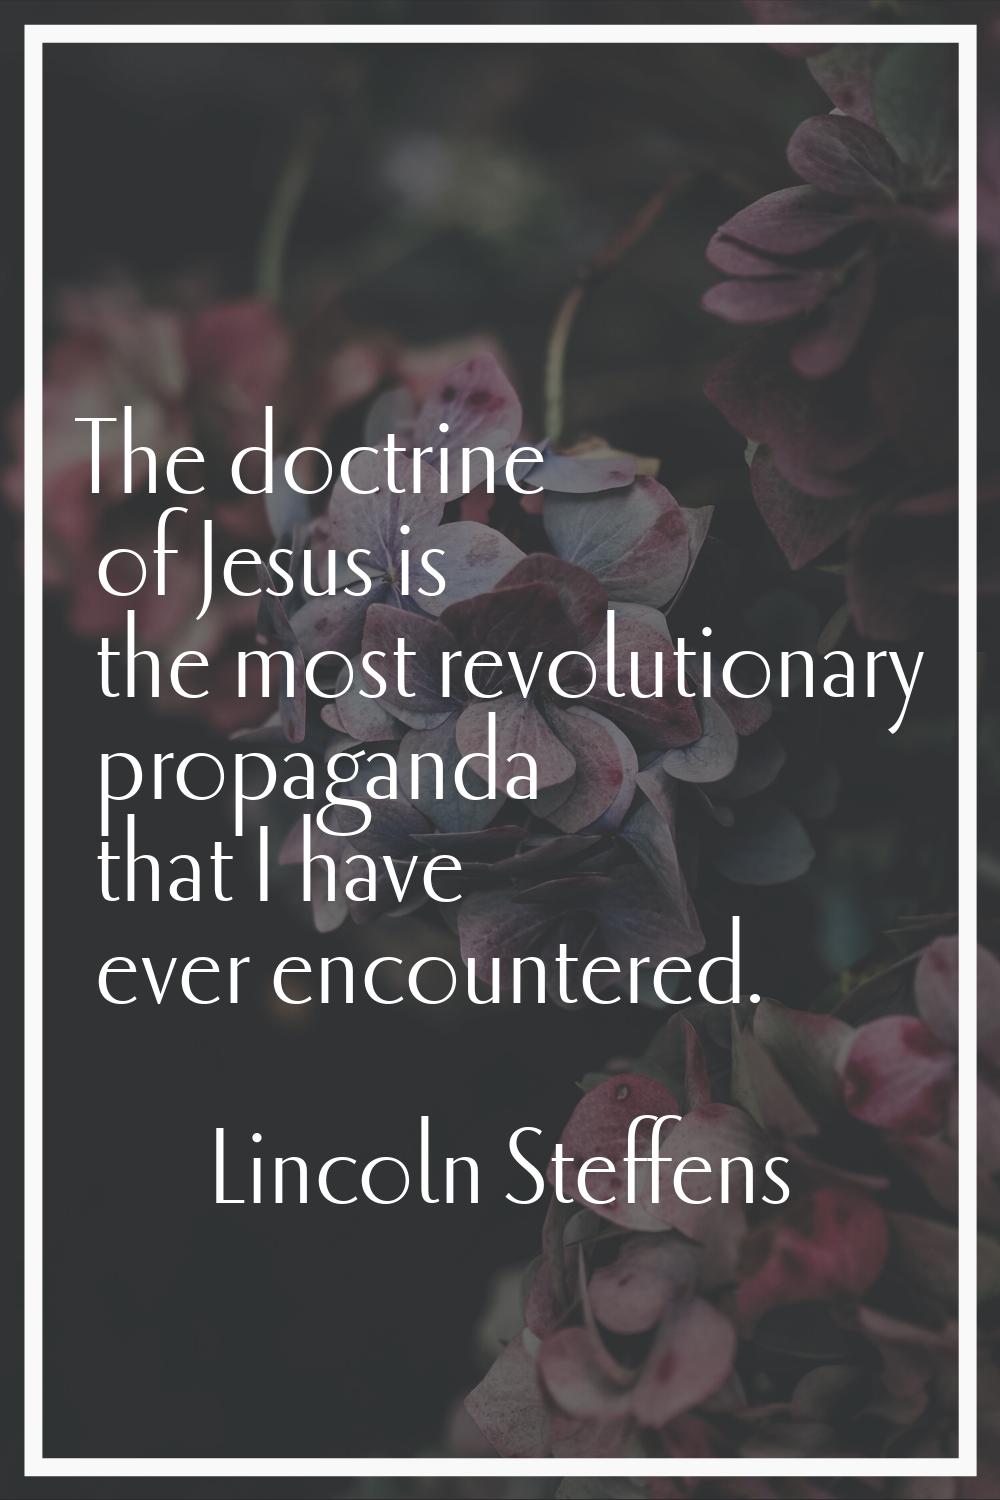 The doctrine of Jesus is the most revolutionary propaganda that I have ever encountered.